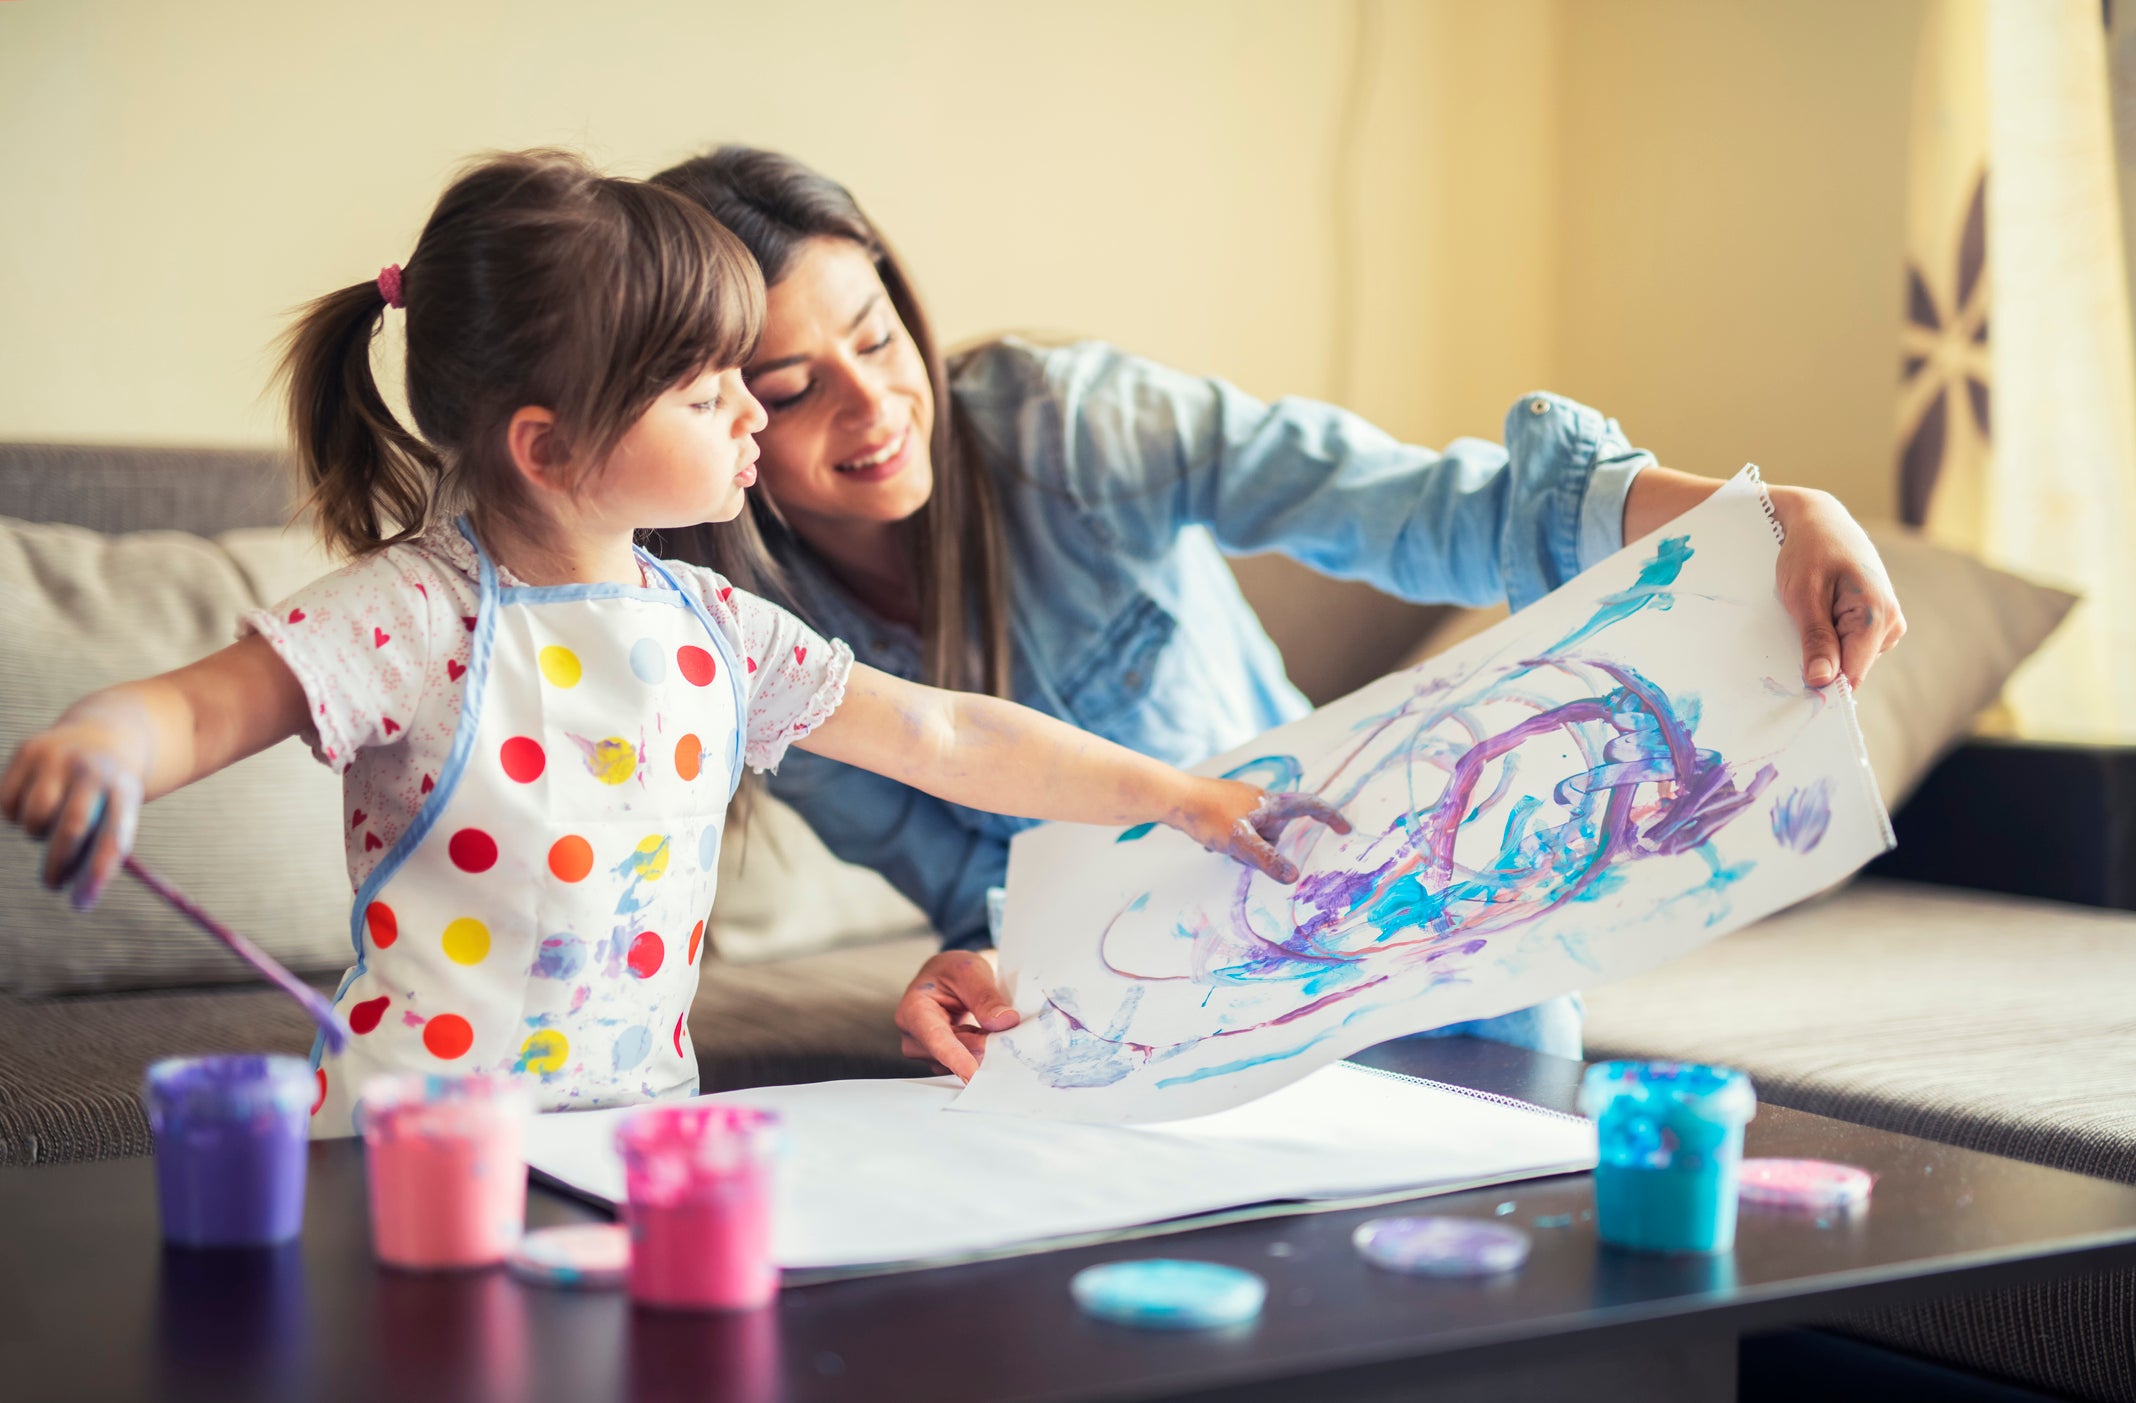 Finger painting for young children